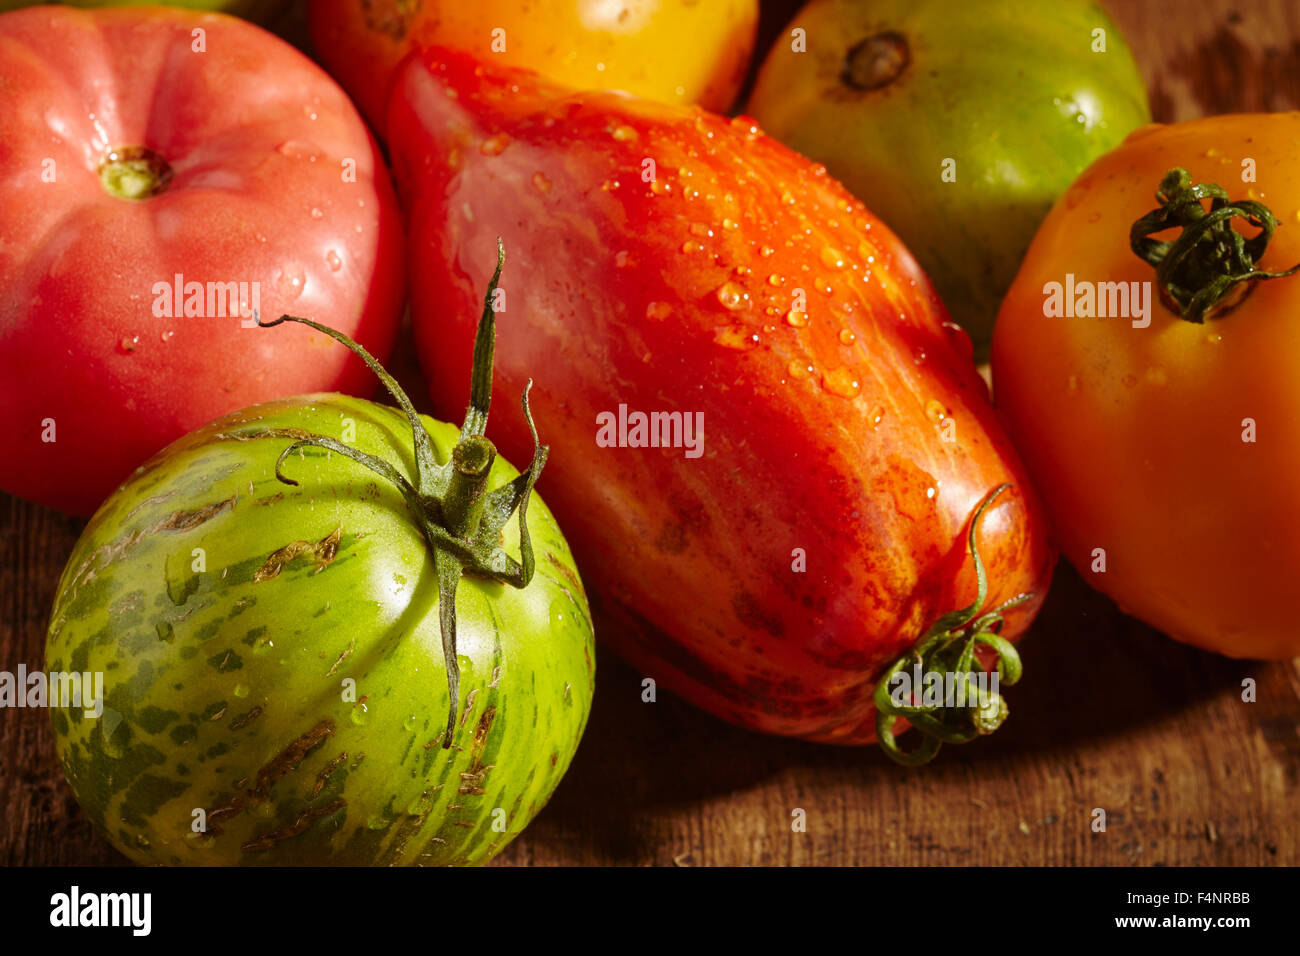 Assorted heirloom tomatoes Banque D'Images